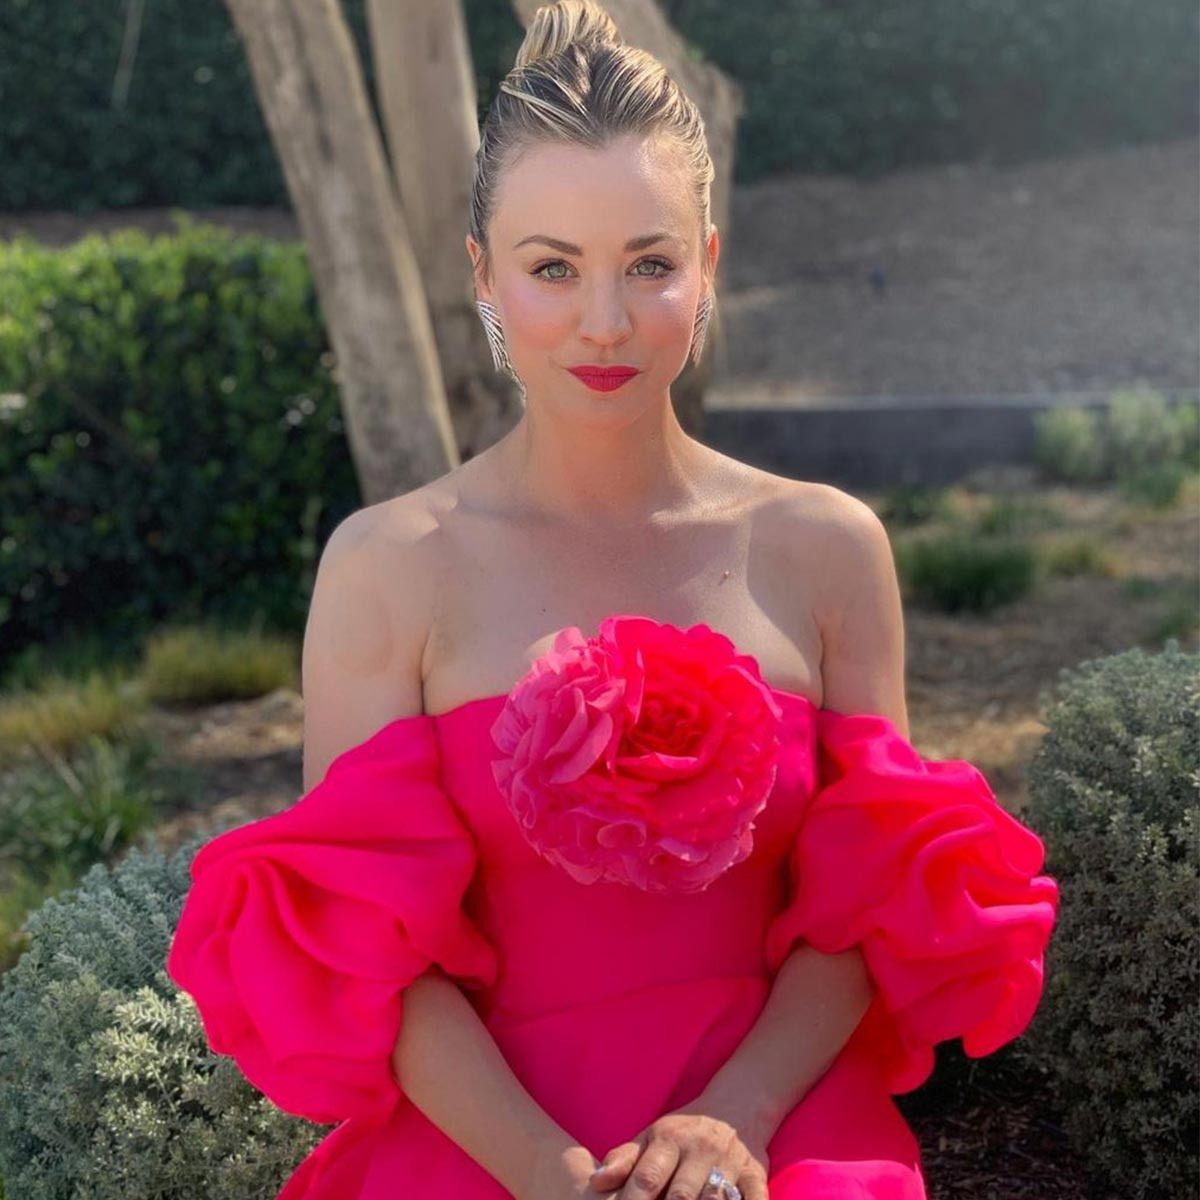 Kaley Cuoco Fucking Ex - Kaley Cuoco News, Pictures, and Videos - E! Online